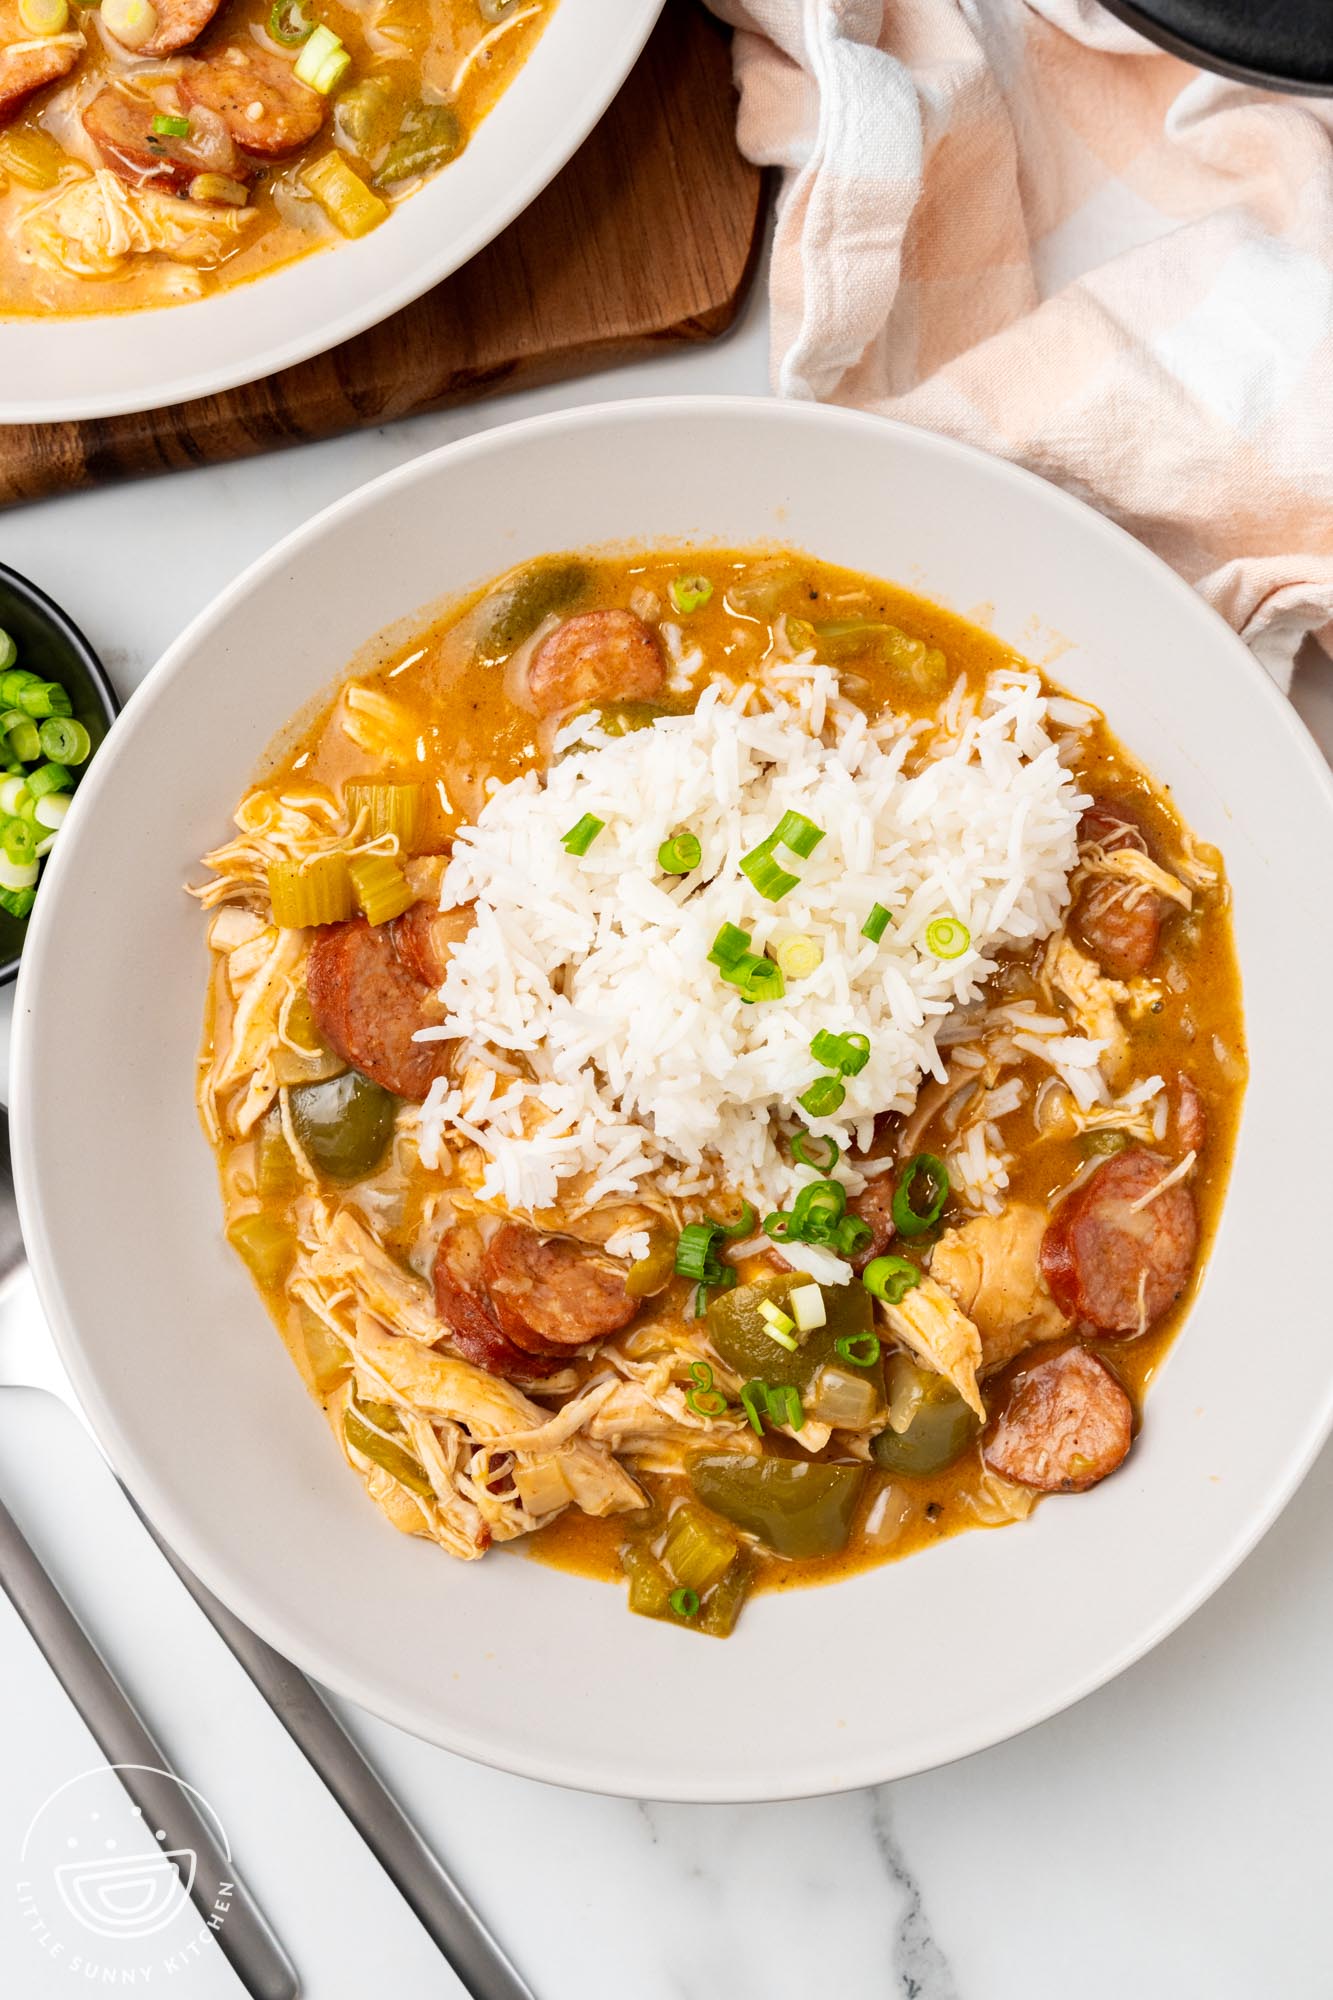 overhead view of a plate of shredded chicken and sausage gumbo with rice.